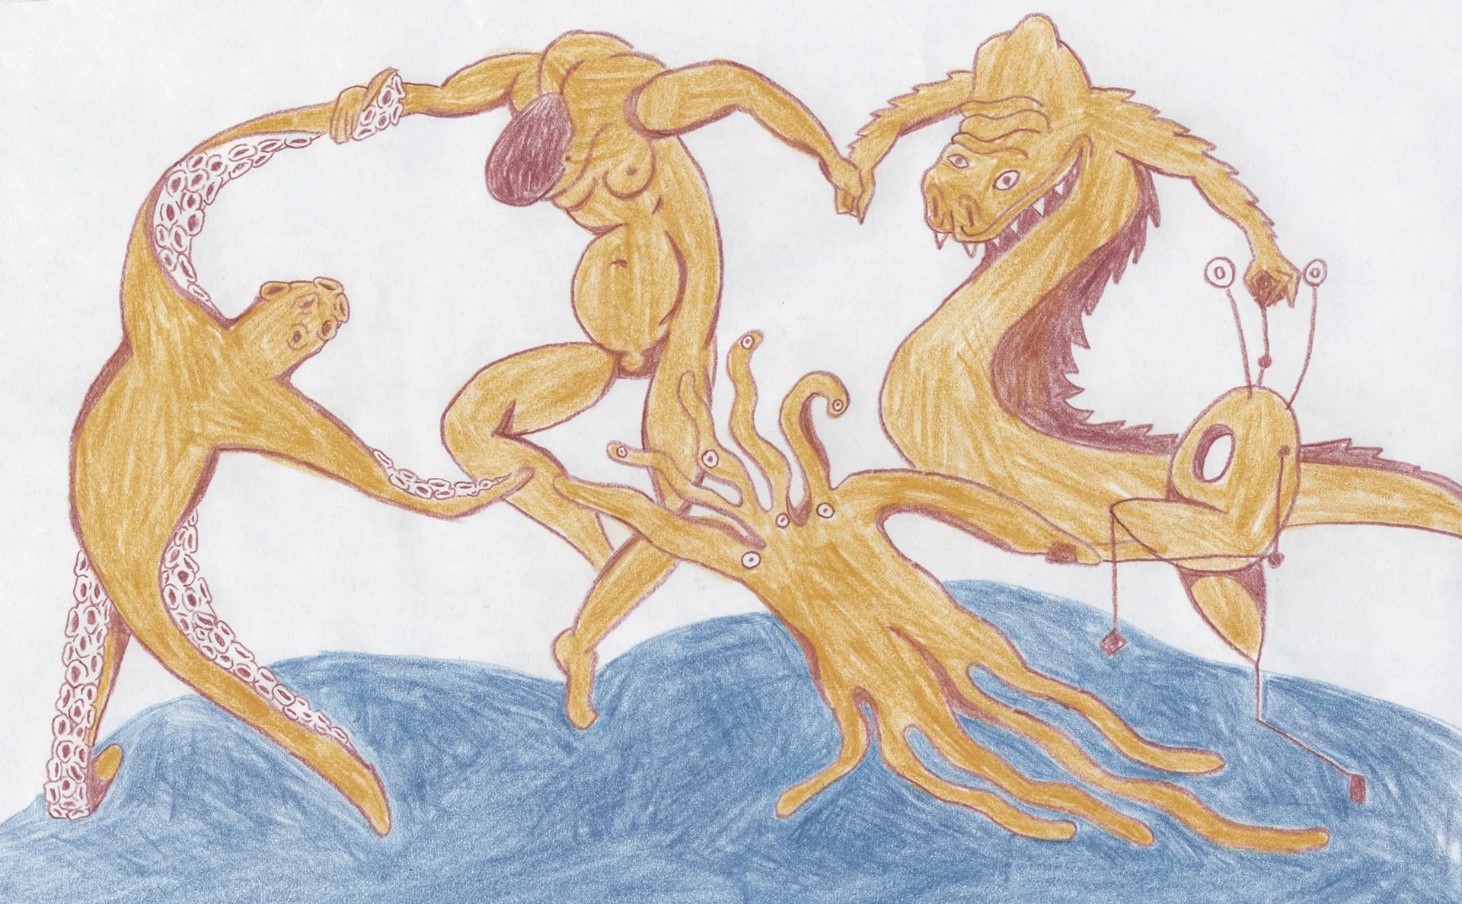 A pencil drawing shows a human and four fantastical creatures holding hands and dancing in a circle. They are all tan-colored and outlined in burgundy.